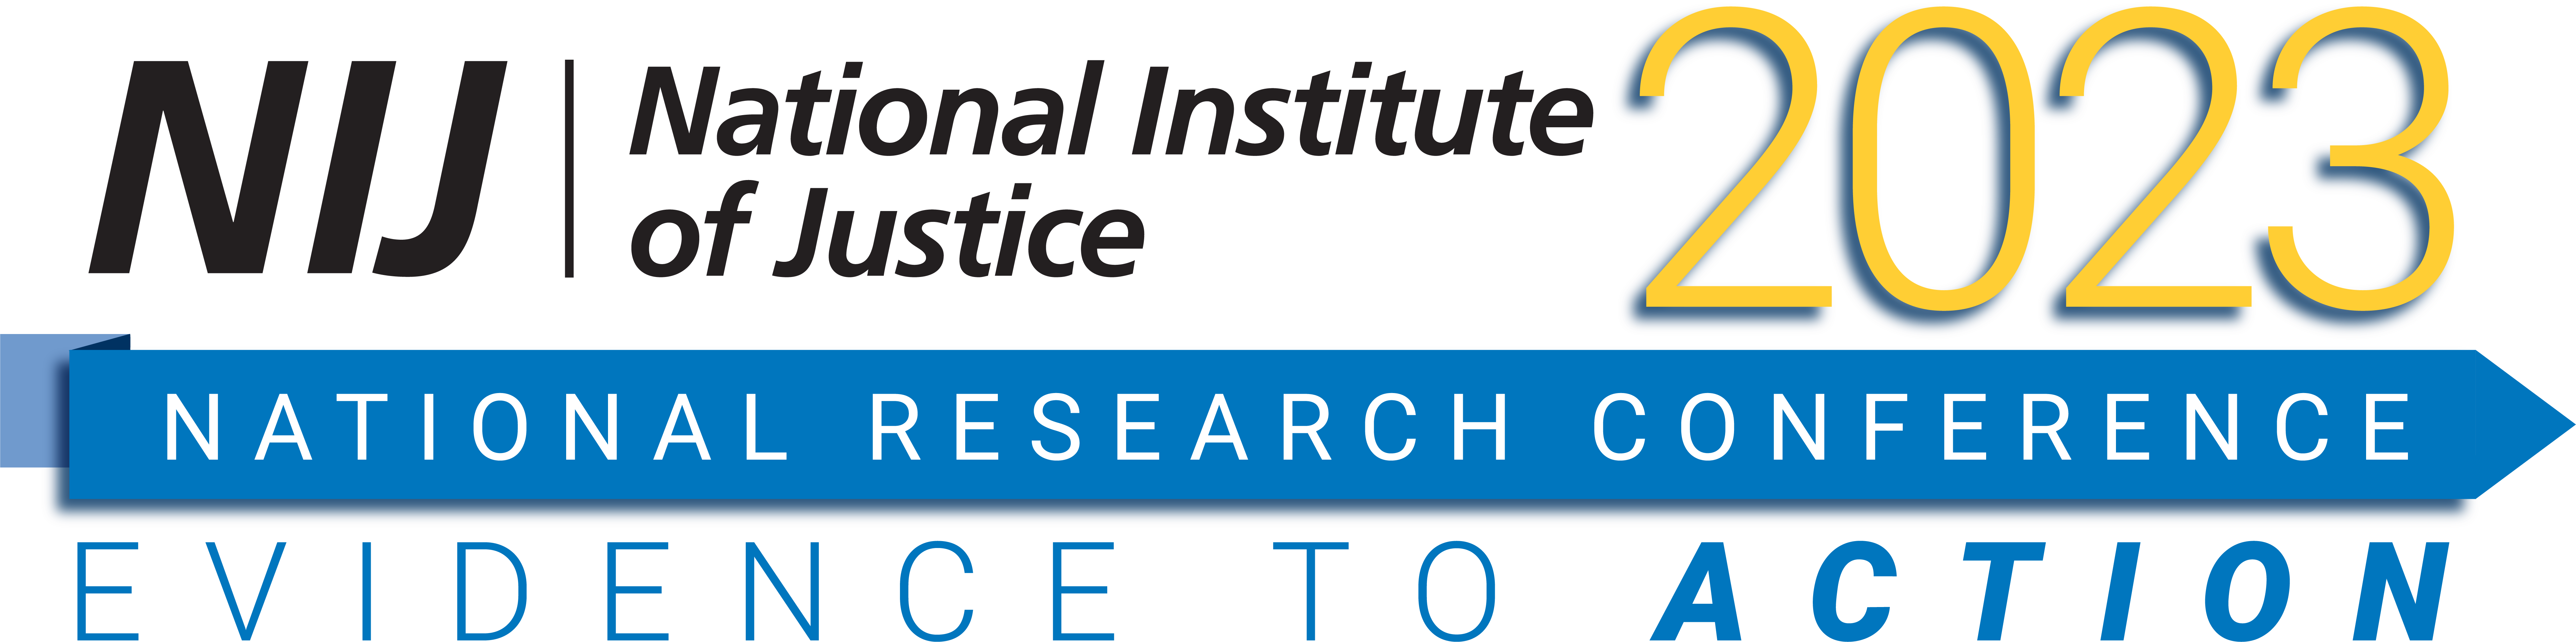 National Institute of Justice 2023 National Research Conference 2023, Evidence to Action